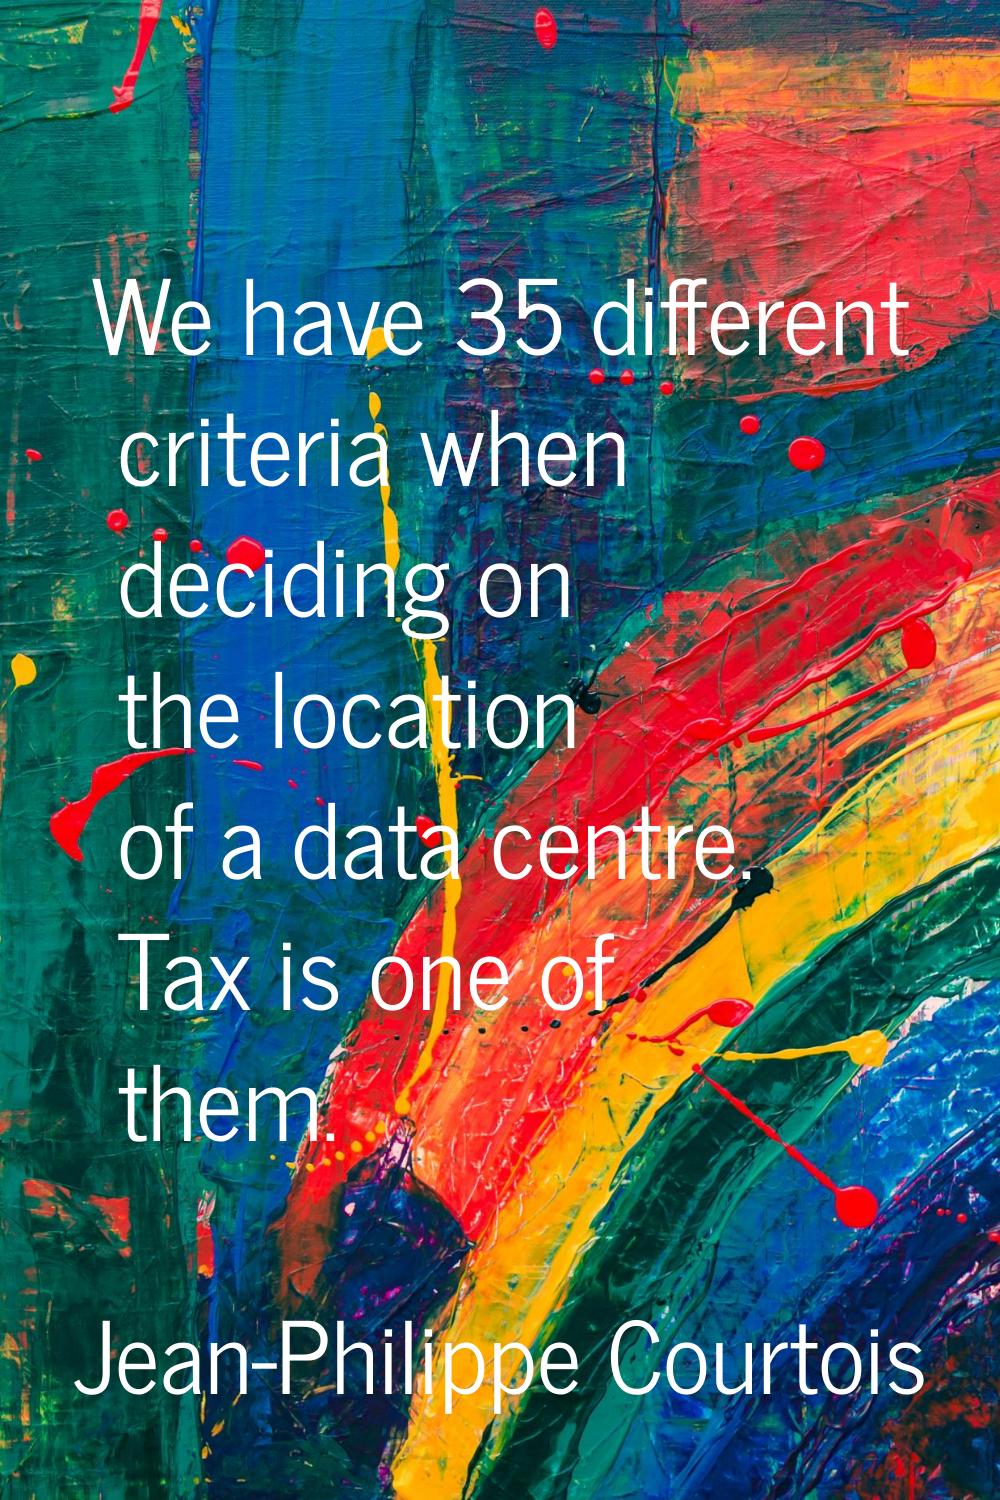 We have 35 different criteria when deciding on the location of a data centre. Tax is one of them.